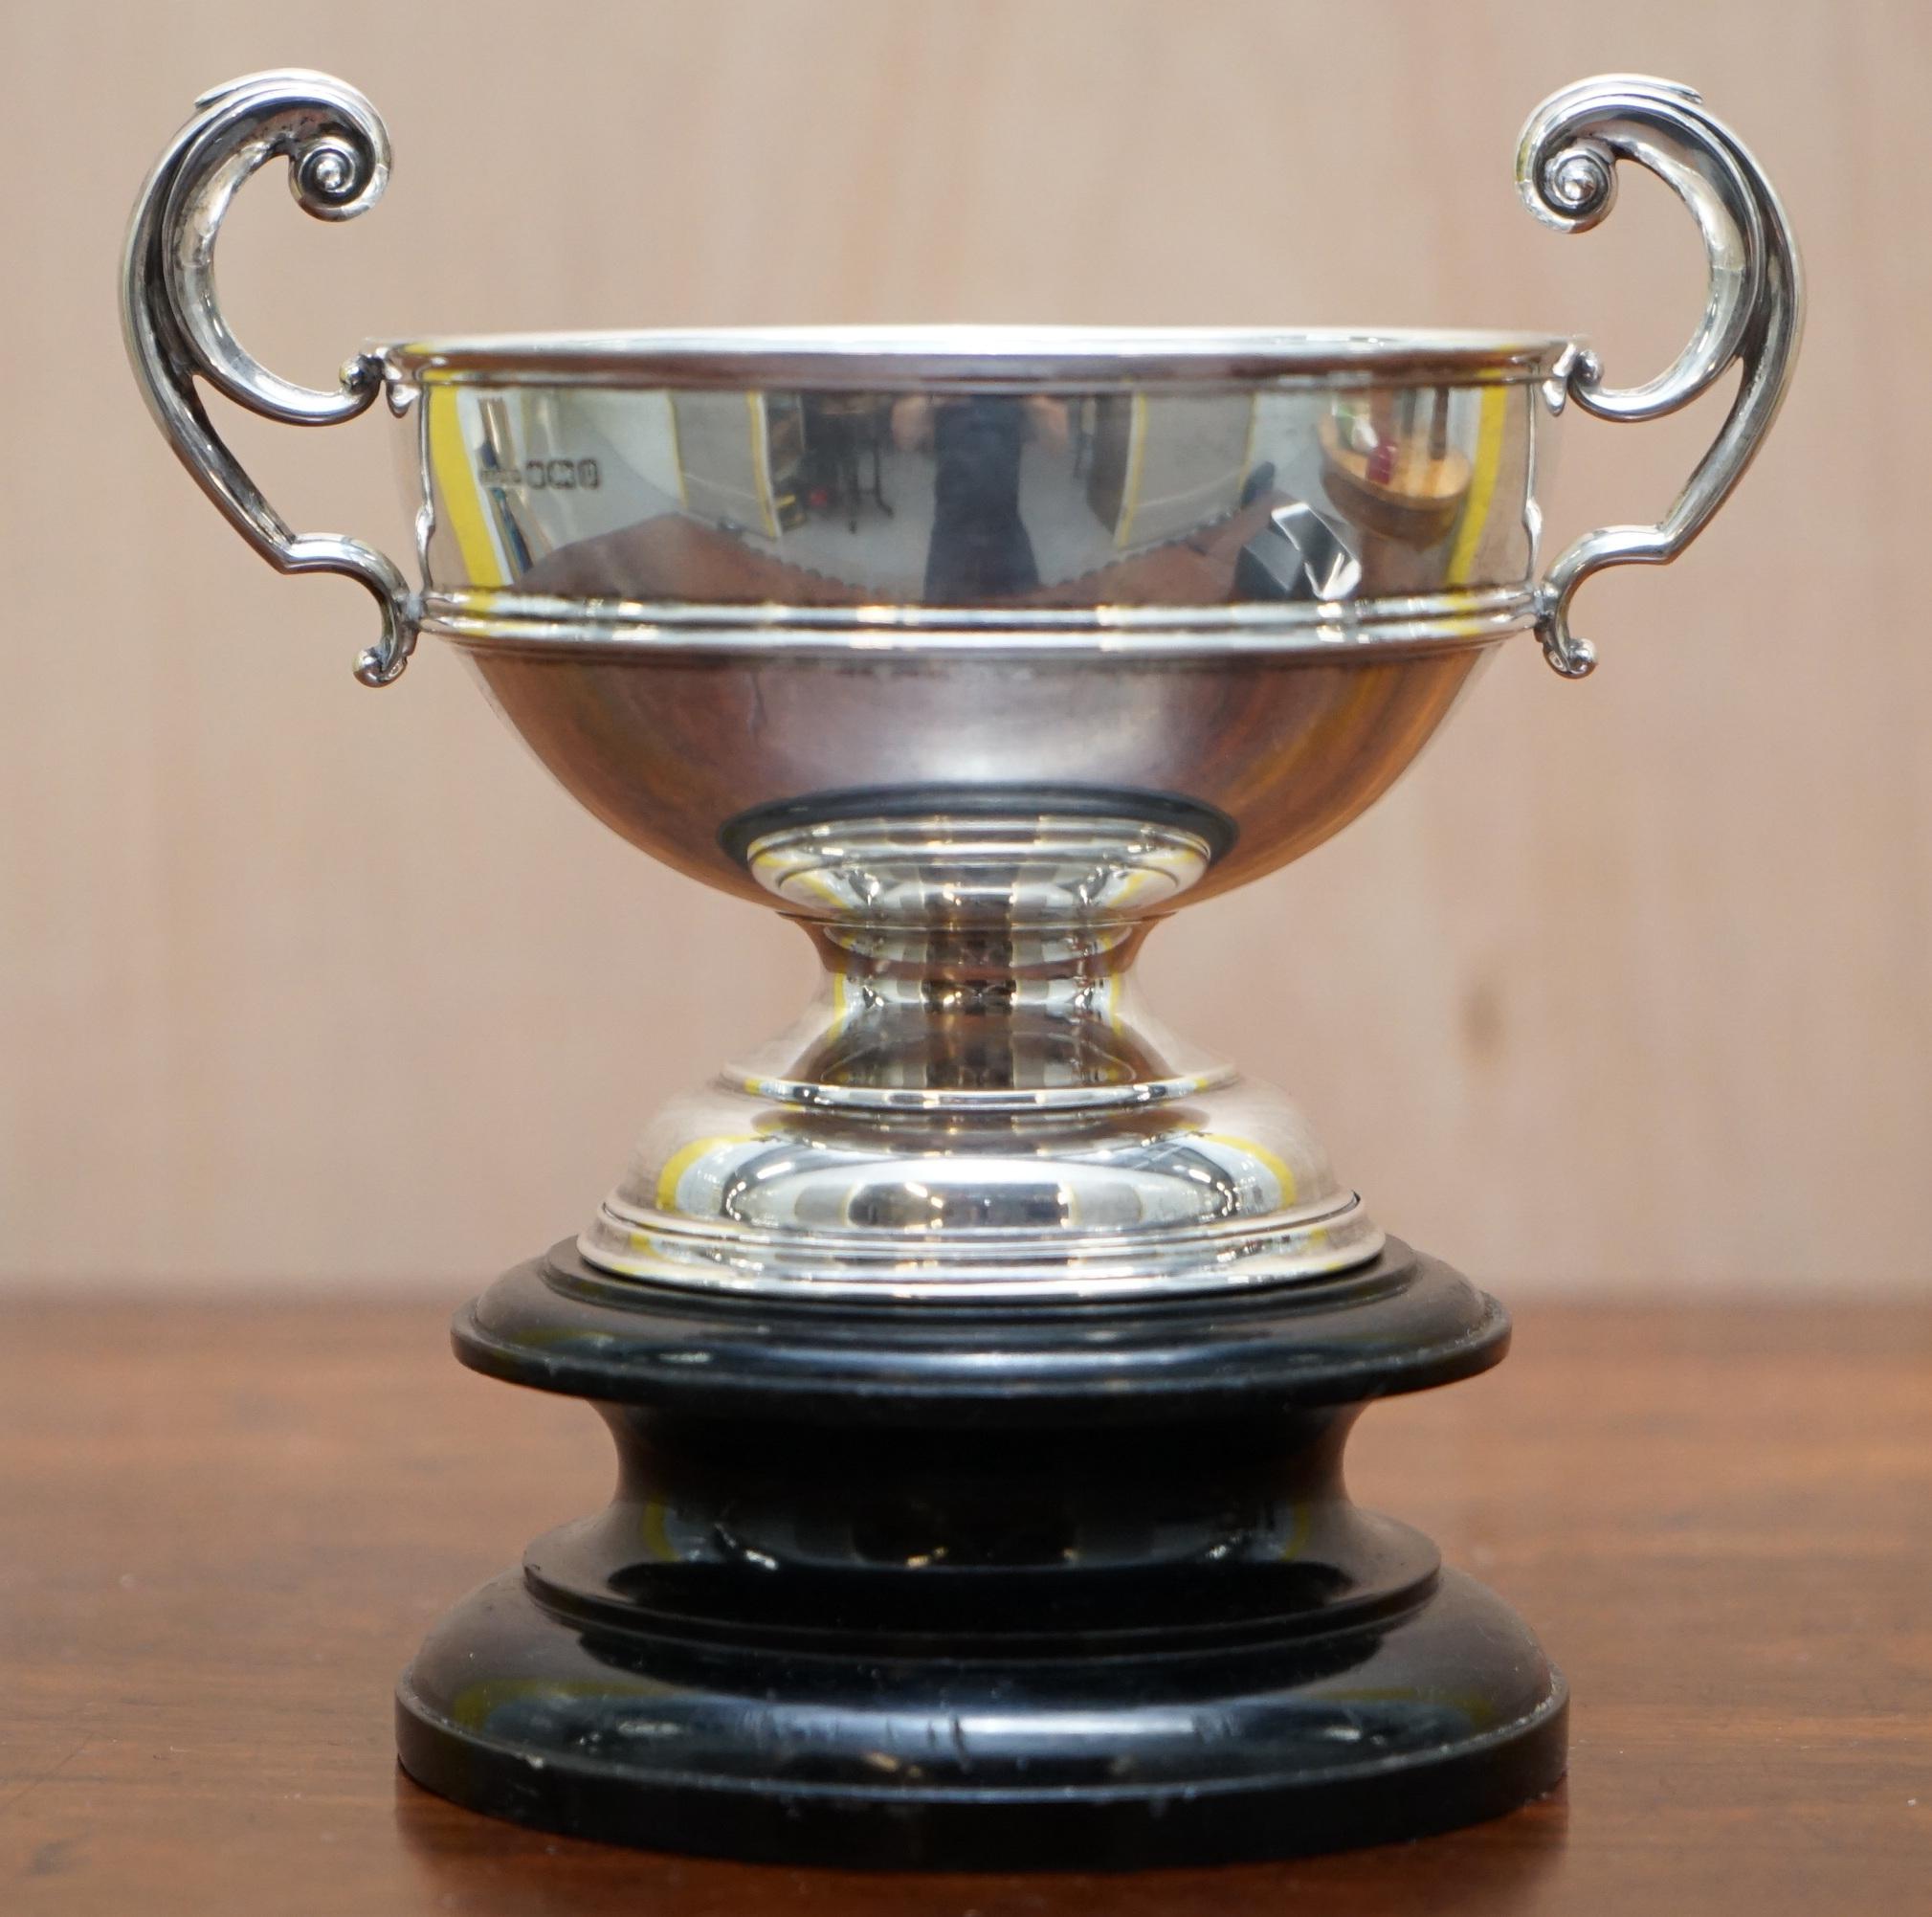 We are delighted to offer for sale this stunning Asprey & Co LTD London Sterling silver fully hallmarked 1907 trophy cup on base 

A good looking and decorative trophy, fully hallmarked with the serial number, then the sideways facing Lion for